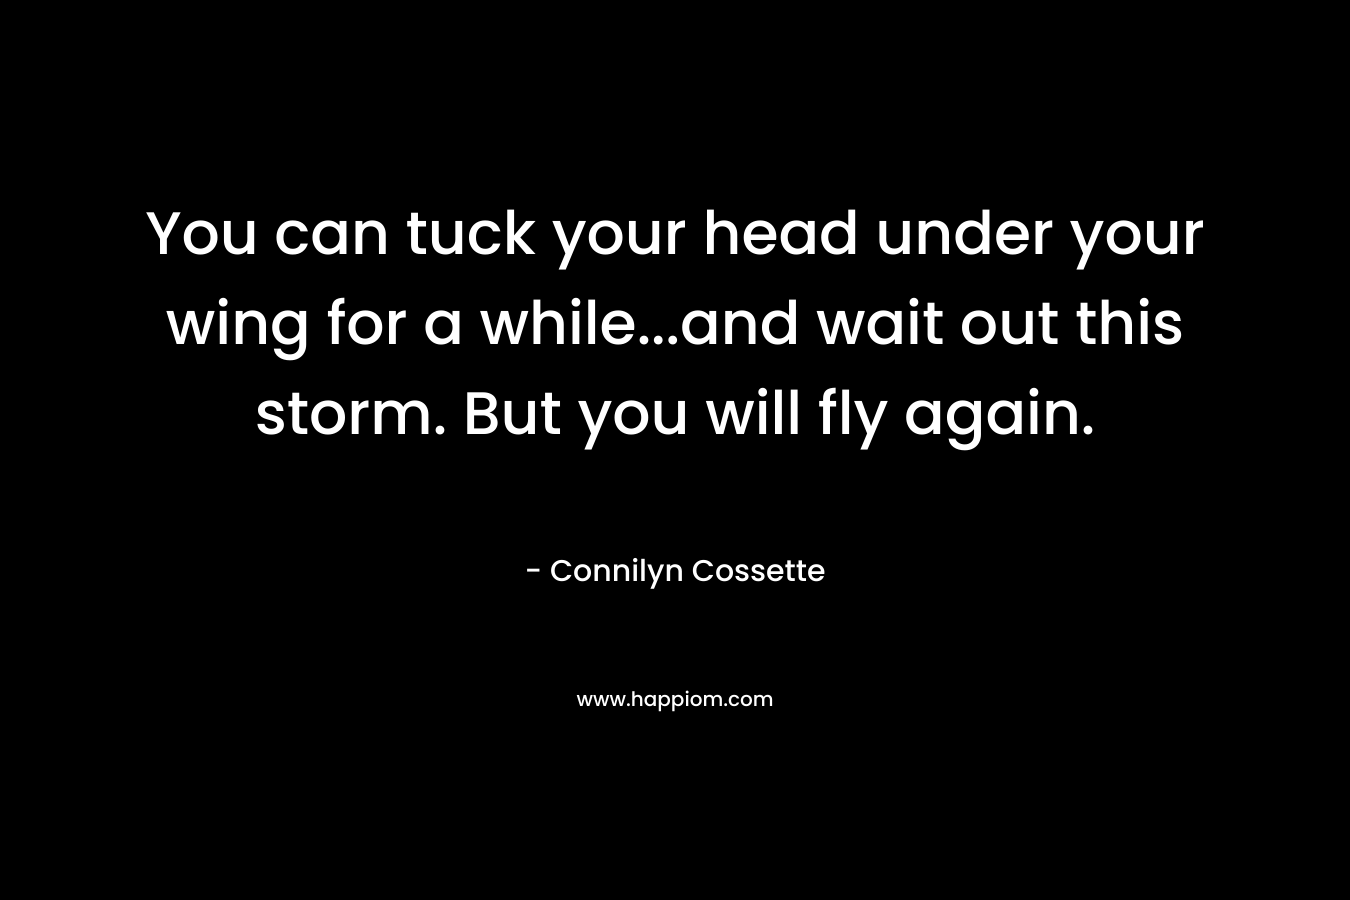 You can tuck your head under your wing for a while...and wait out this storm. But you will fly again.